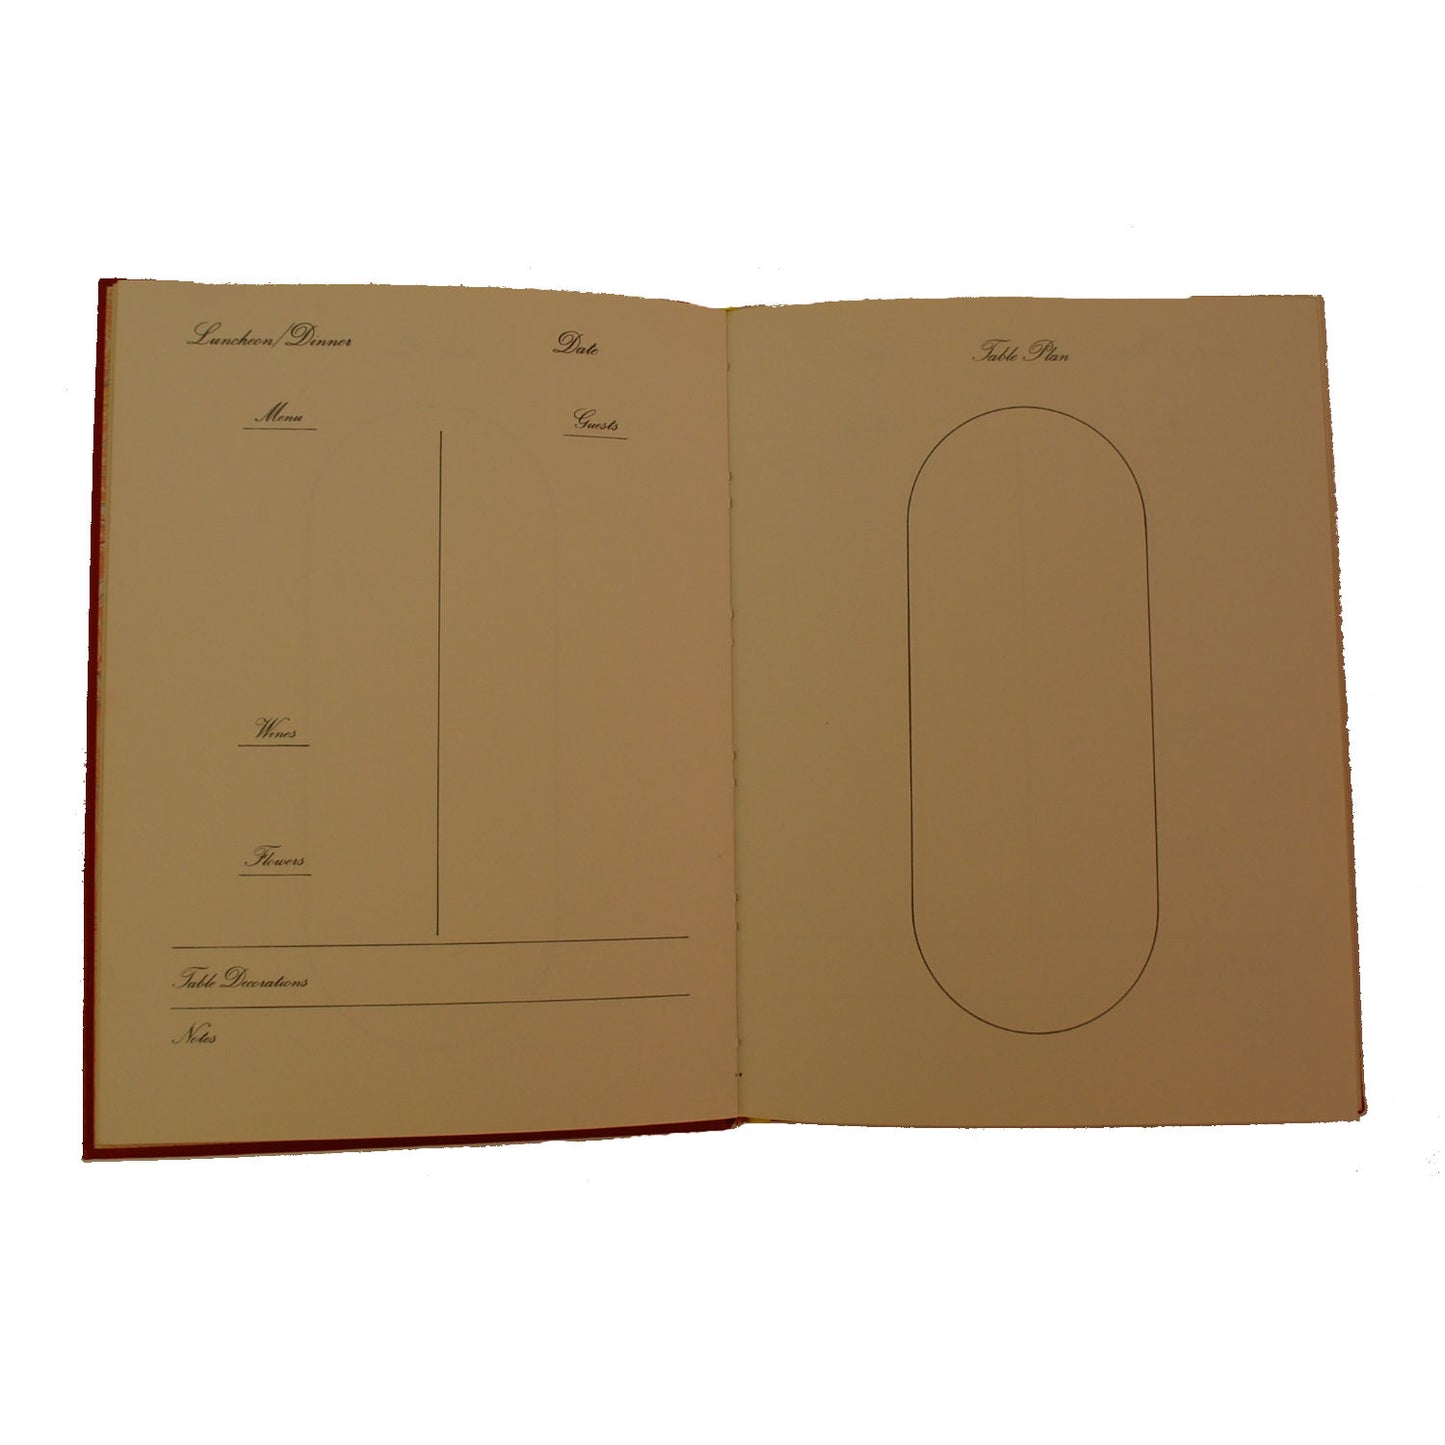 Hostess Book | Dinner Parties Book | Menu Record | Personalized Smooth Calf Leather Book